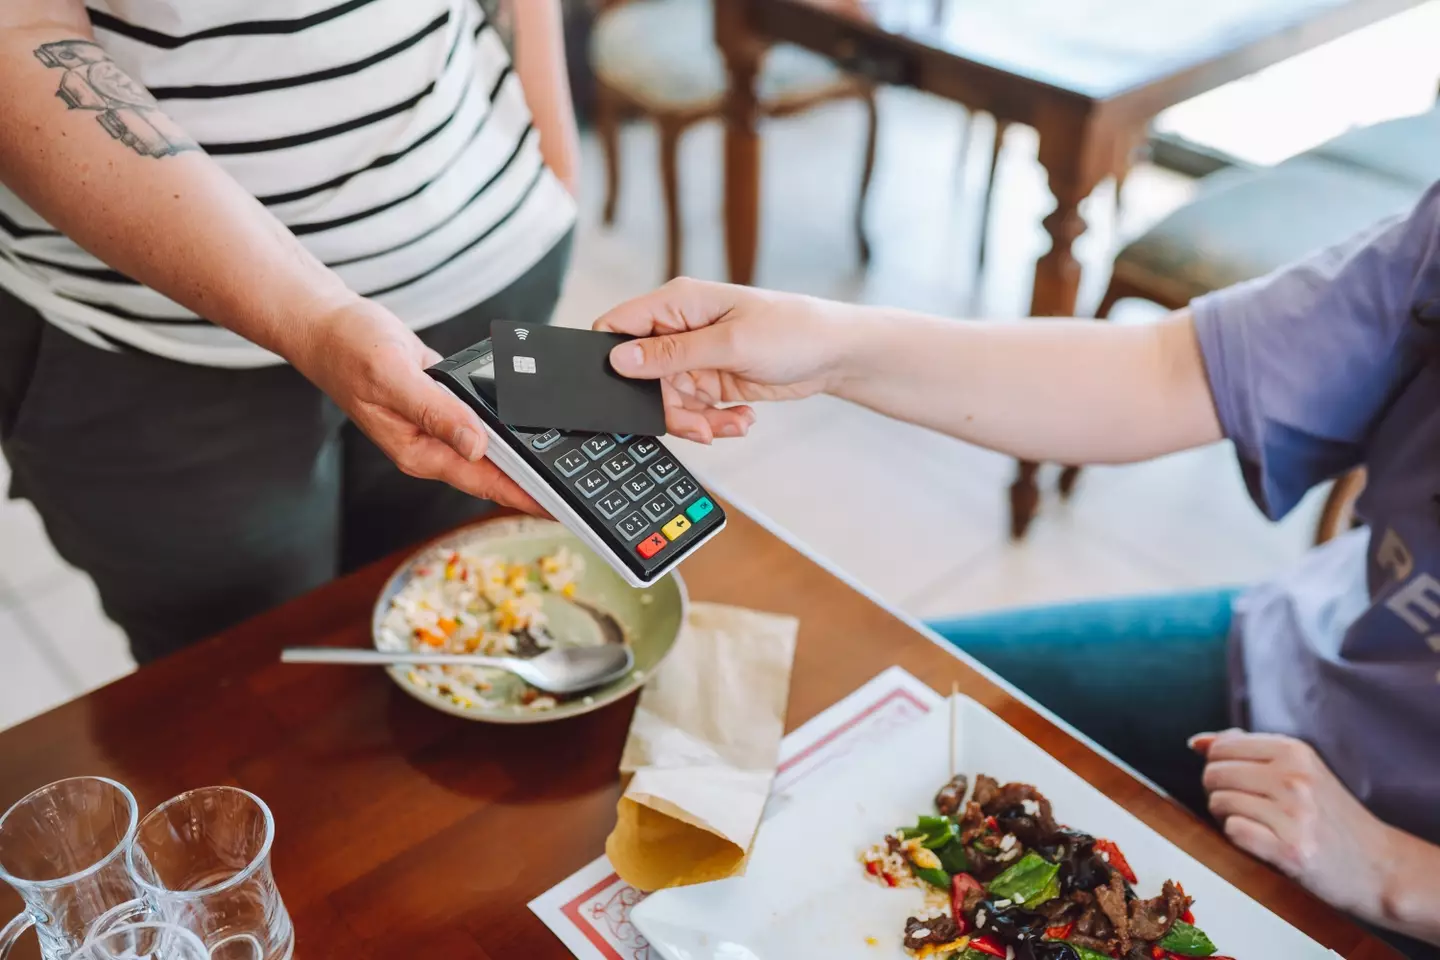 Tipping is typically more common when a face-to-face service is provided.